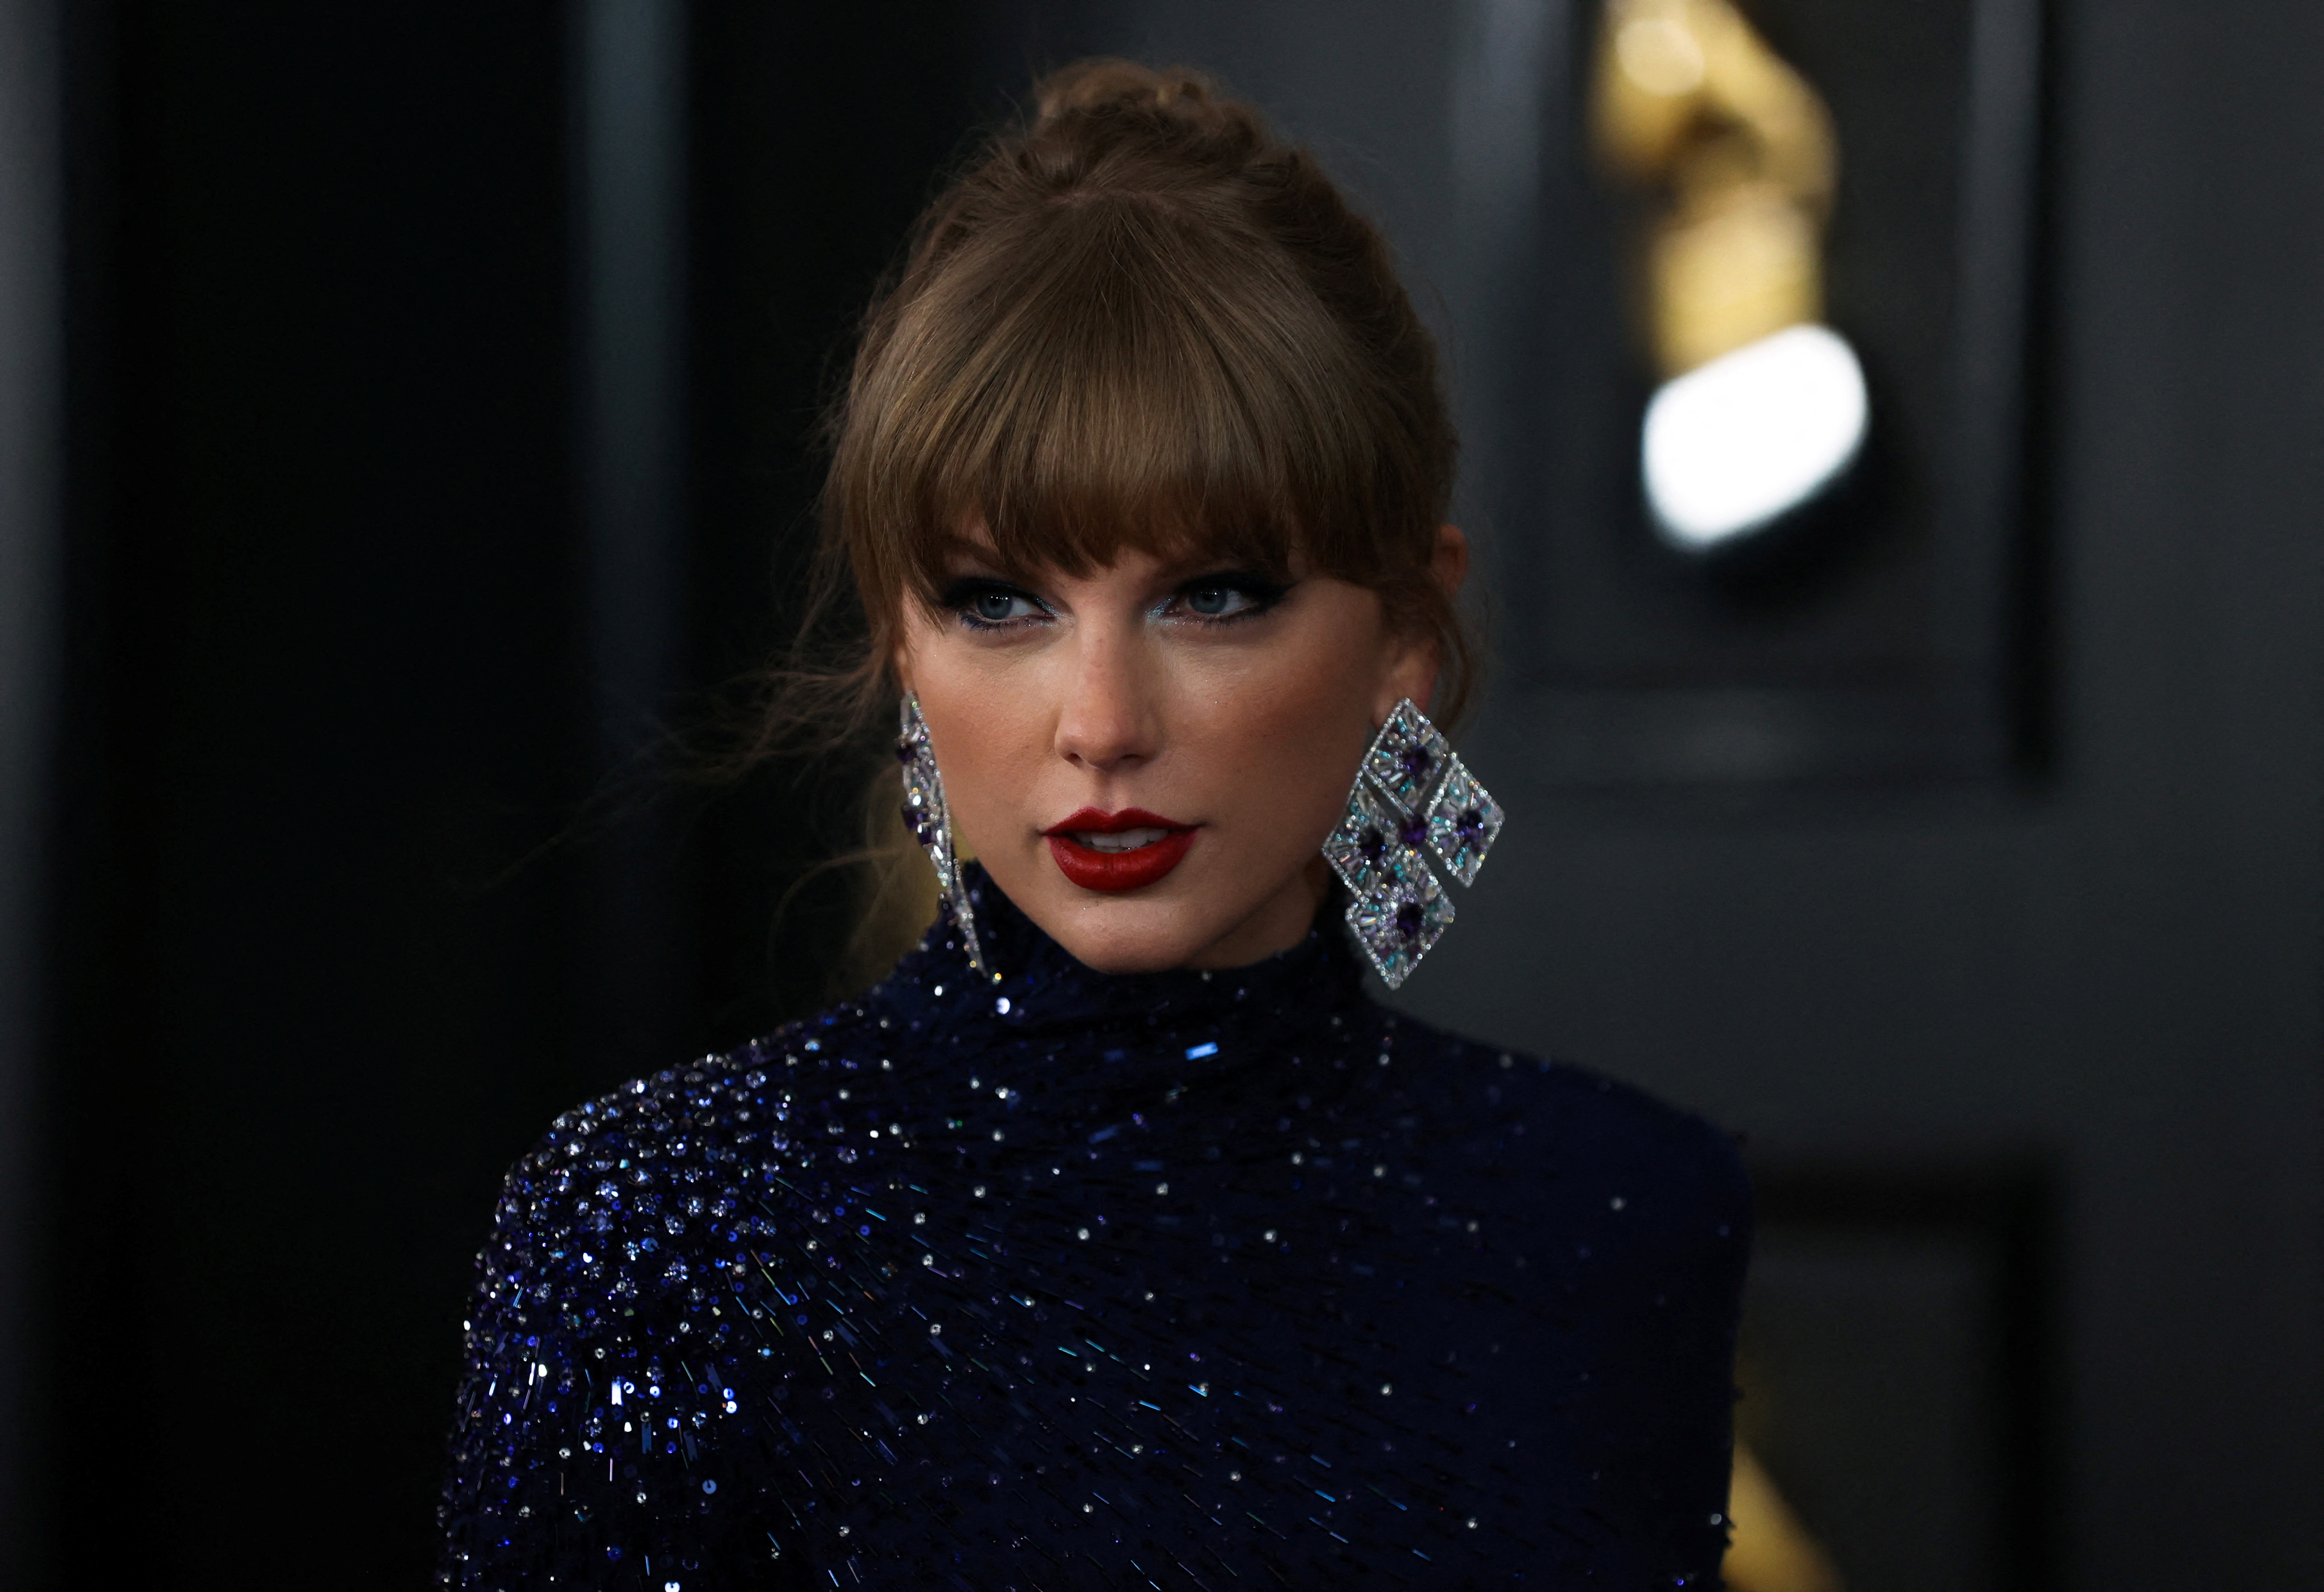 Taylor Swift is asking fans to buy her merchandise for a better